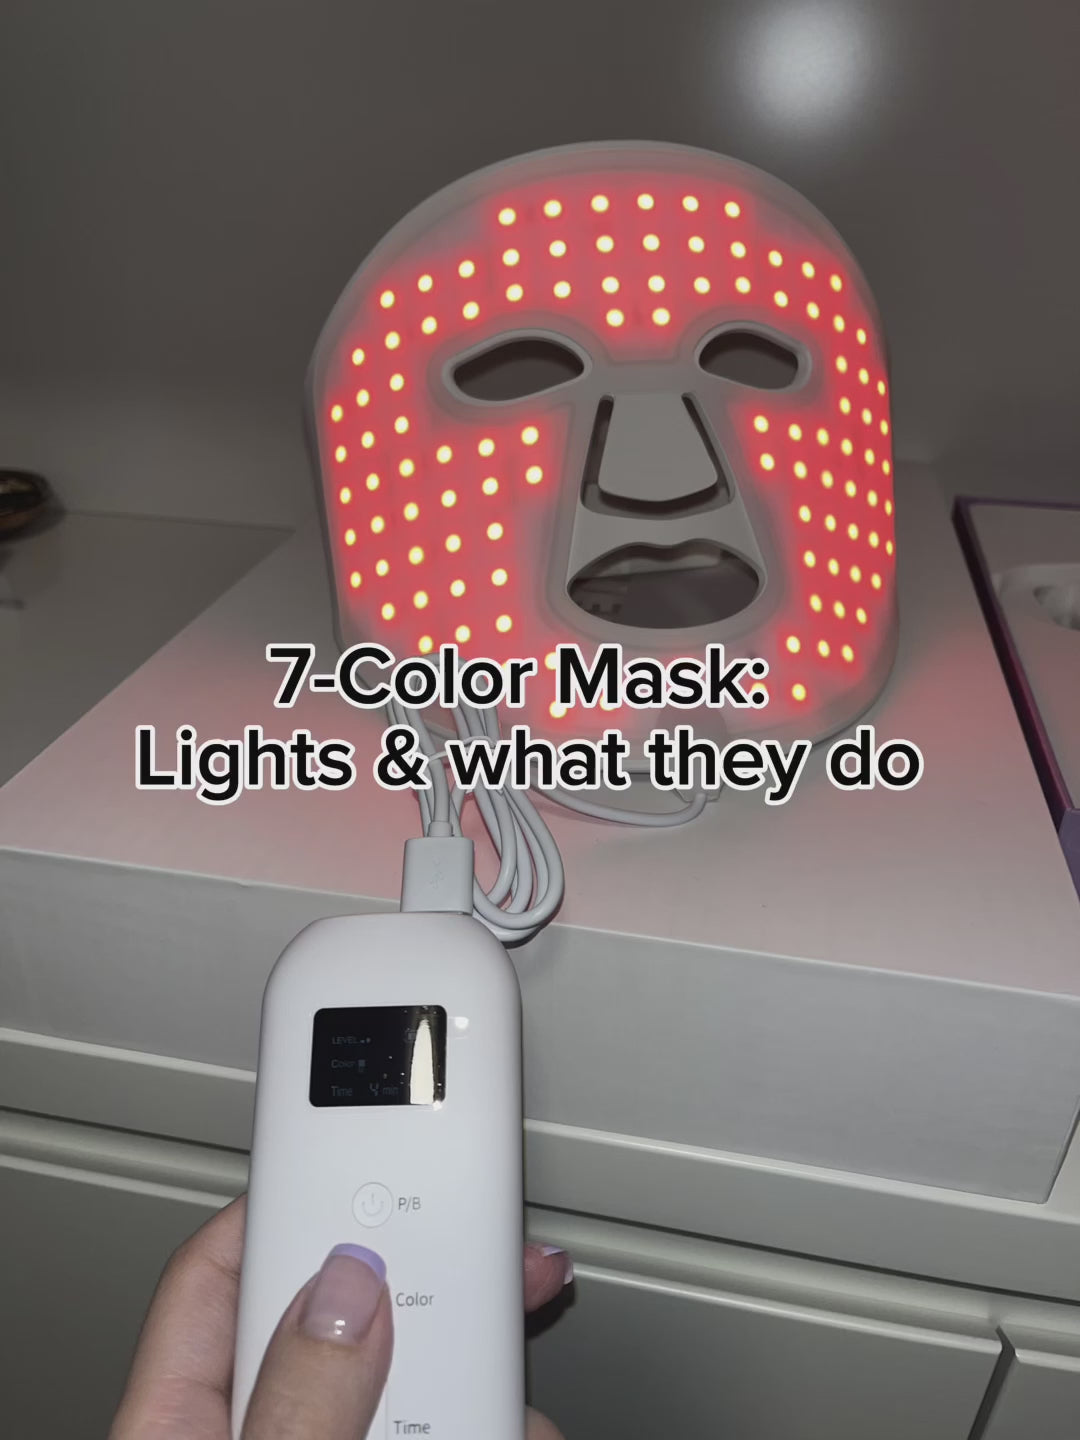  7-color mask - lights & what they do 